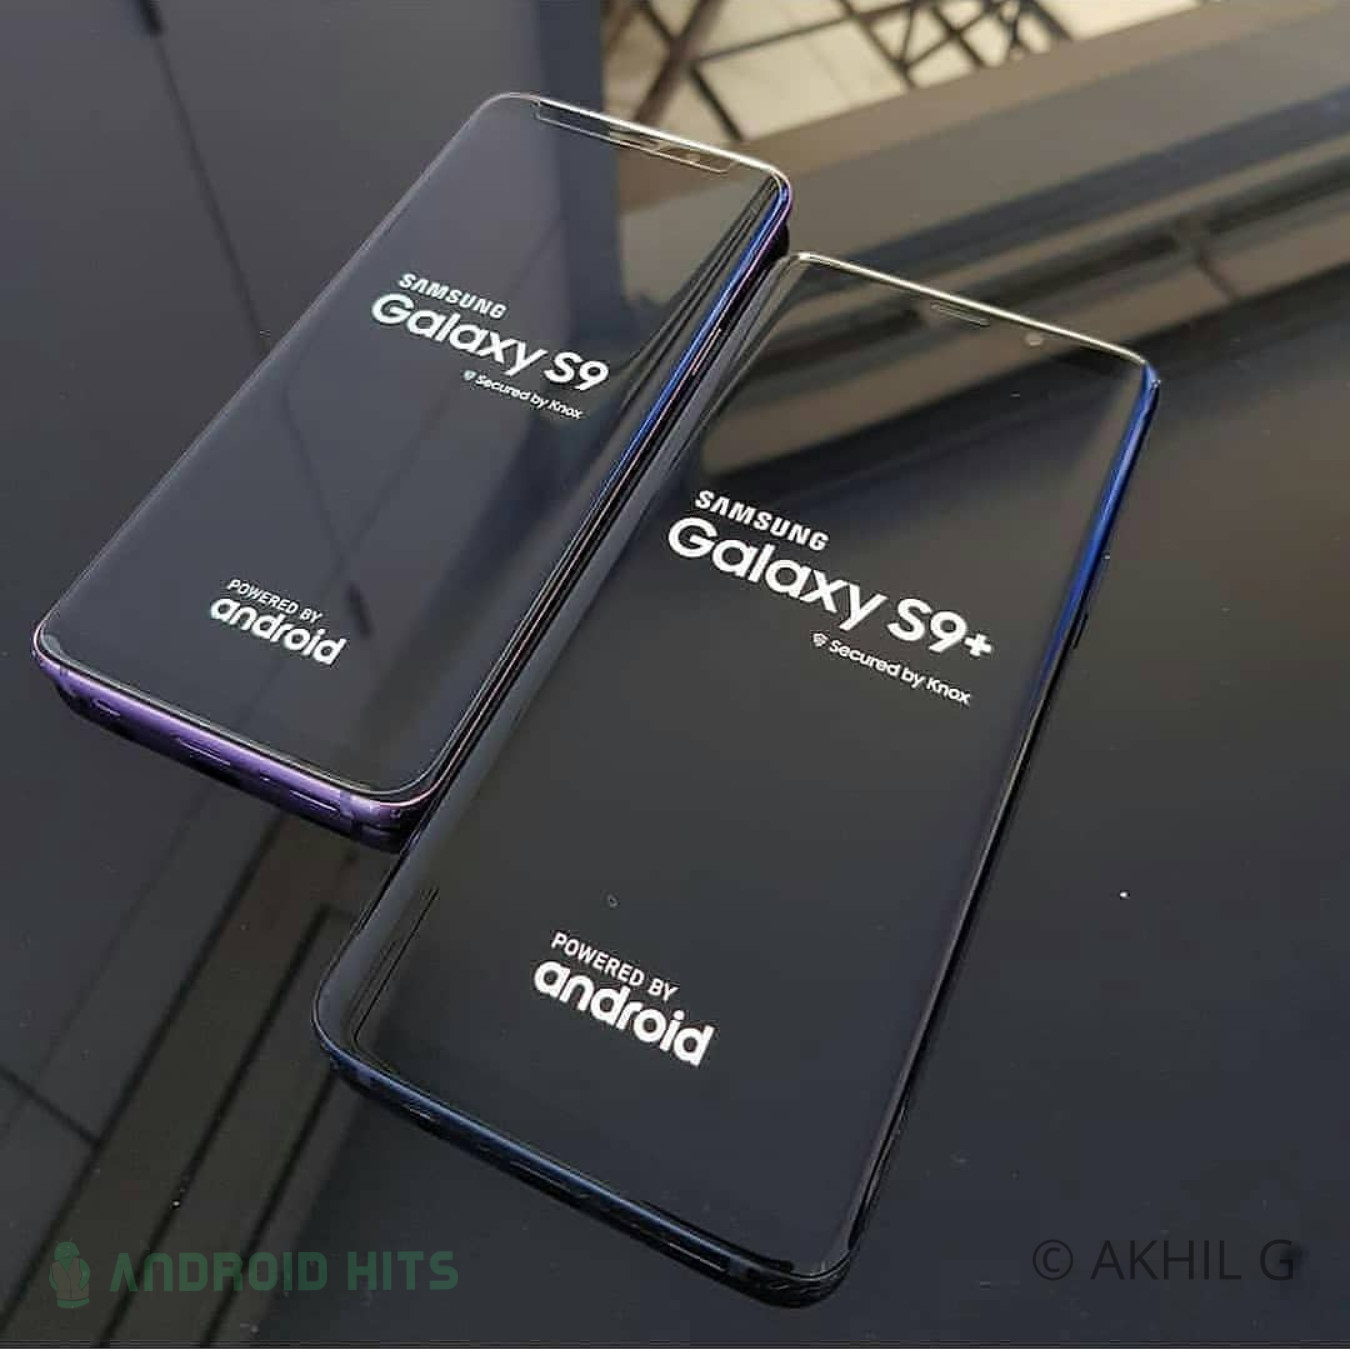 Microsoft Store sells non-Microsoft Edition Galaxy S9 devices with free wireless charger 4